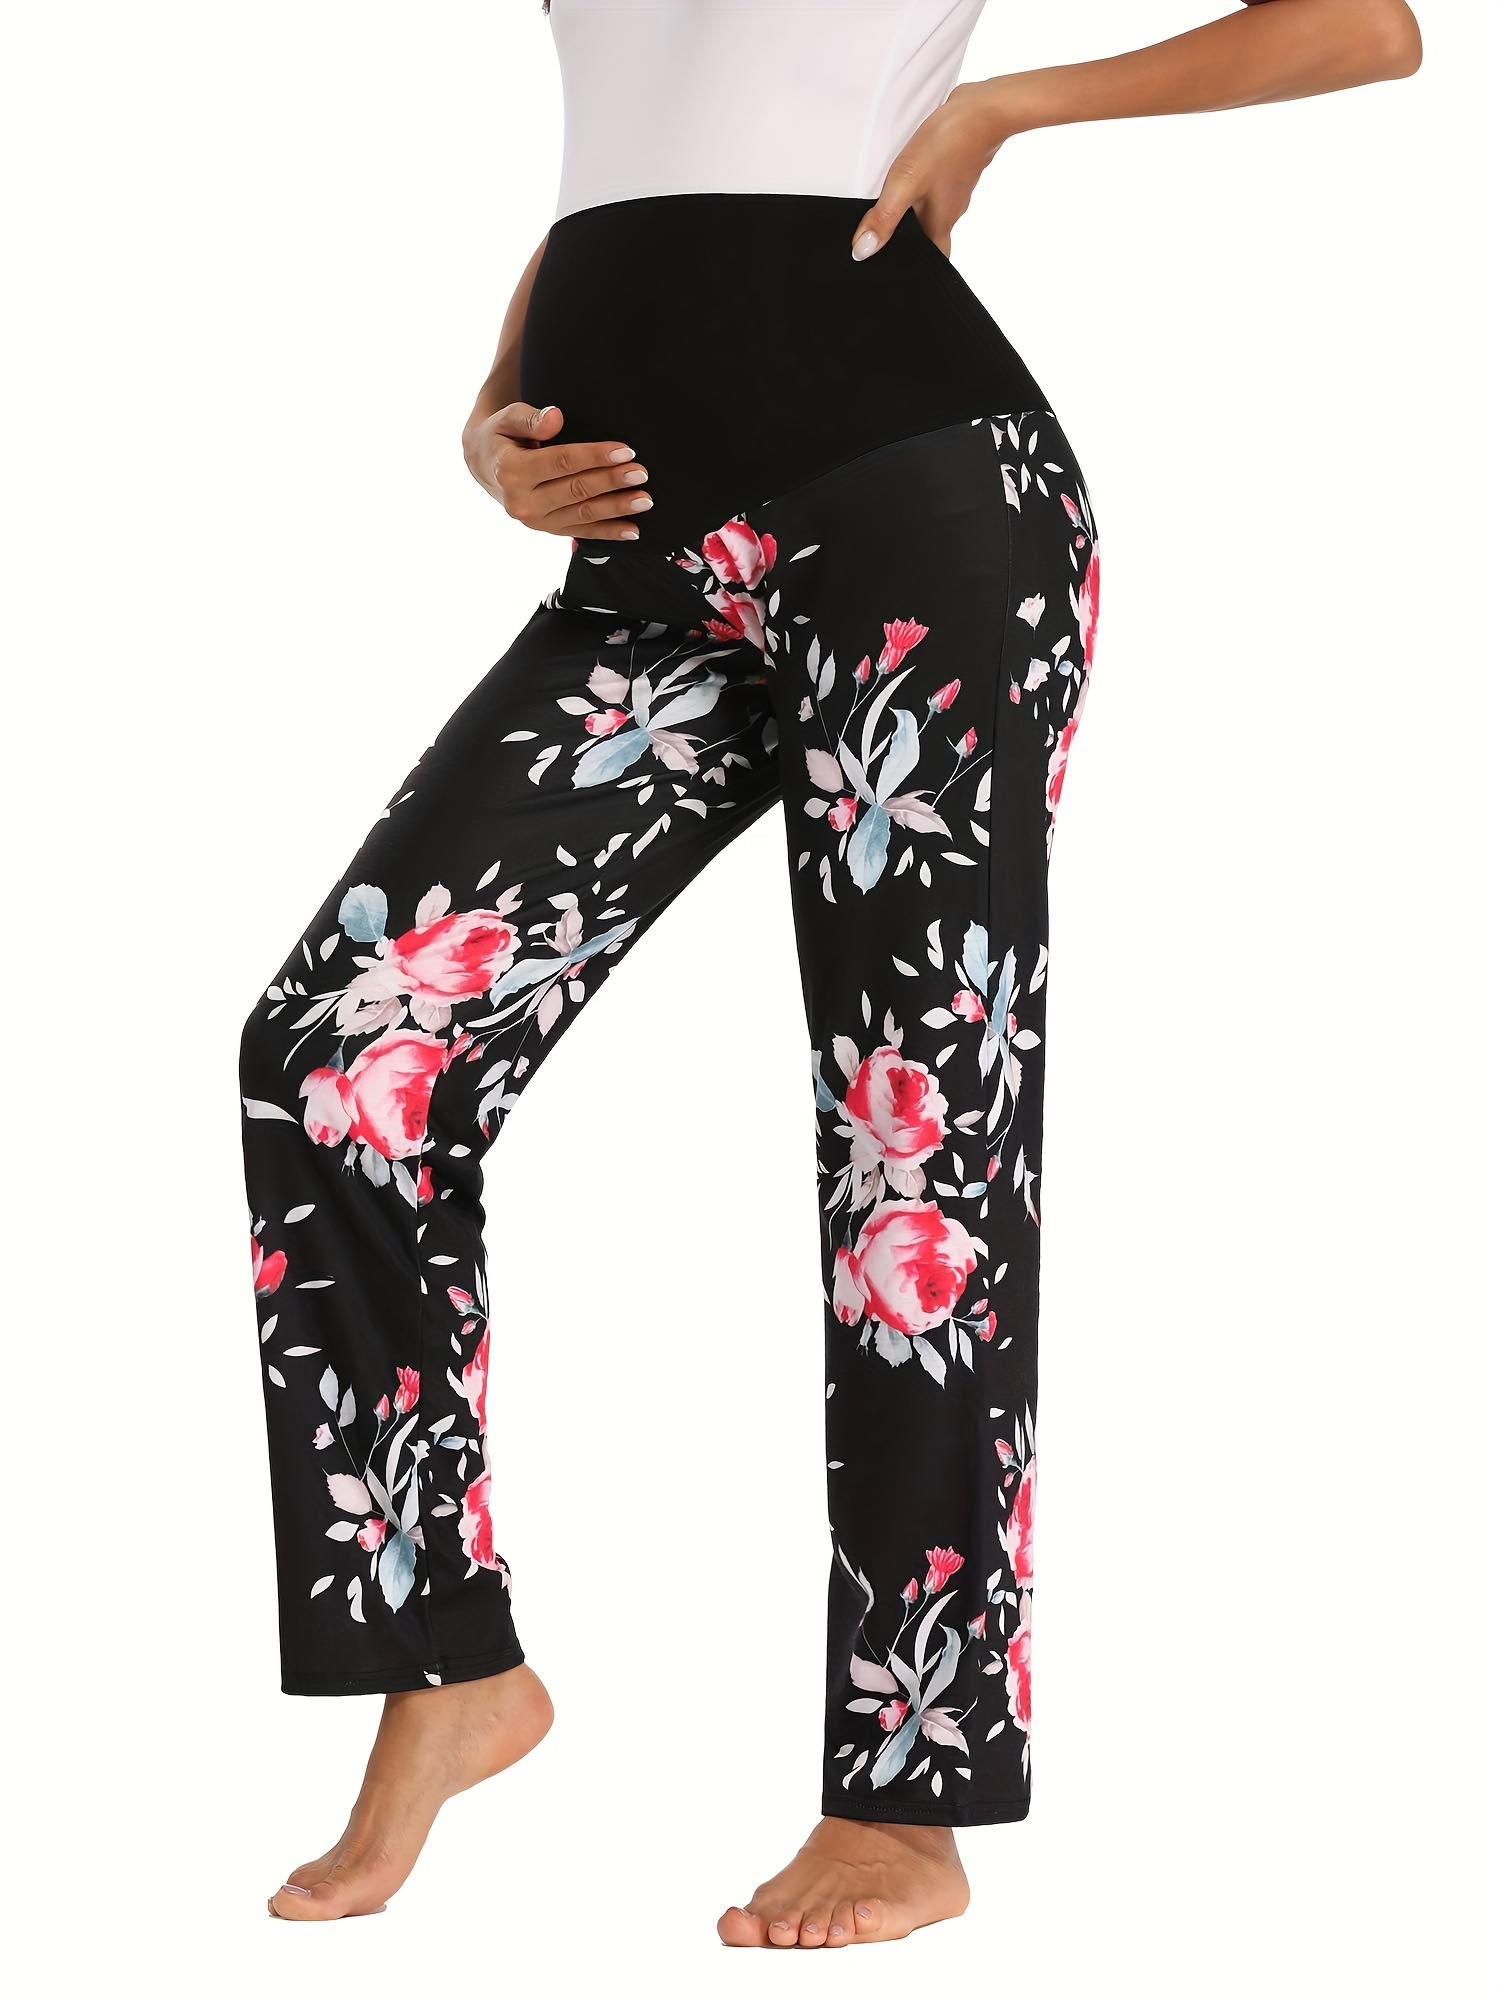 Shop Maternity Pants and Jeans  Spring Maternity Singapore